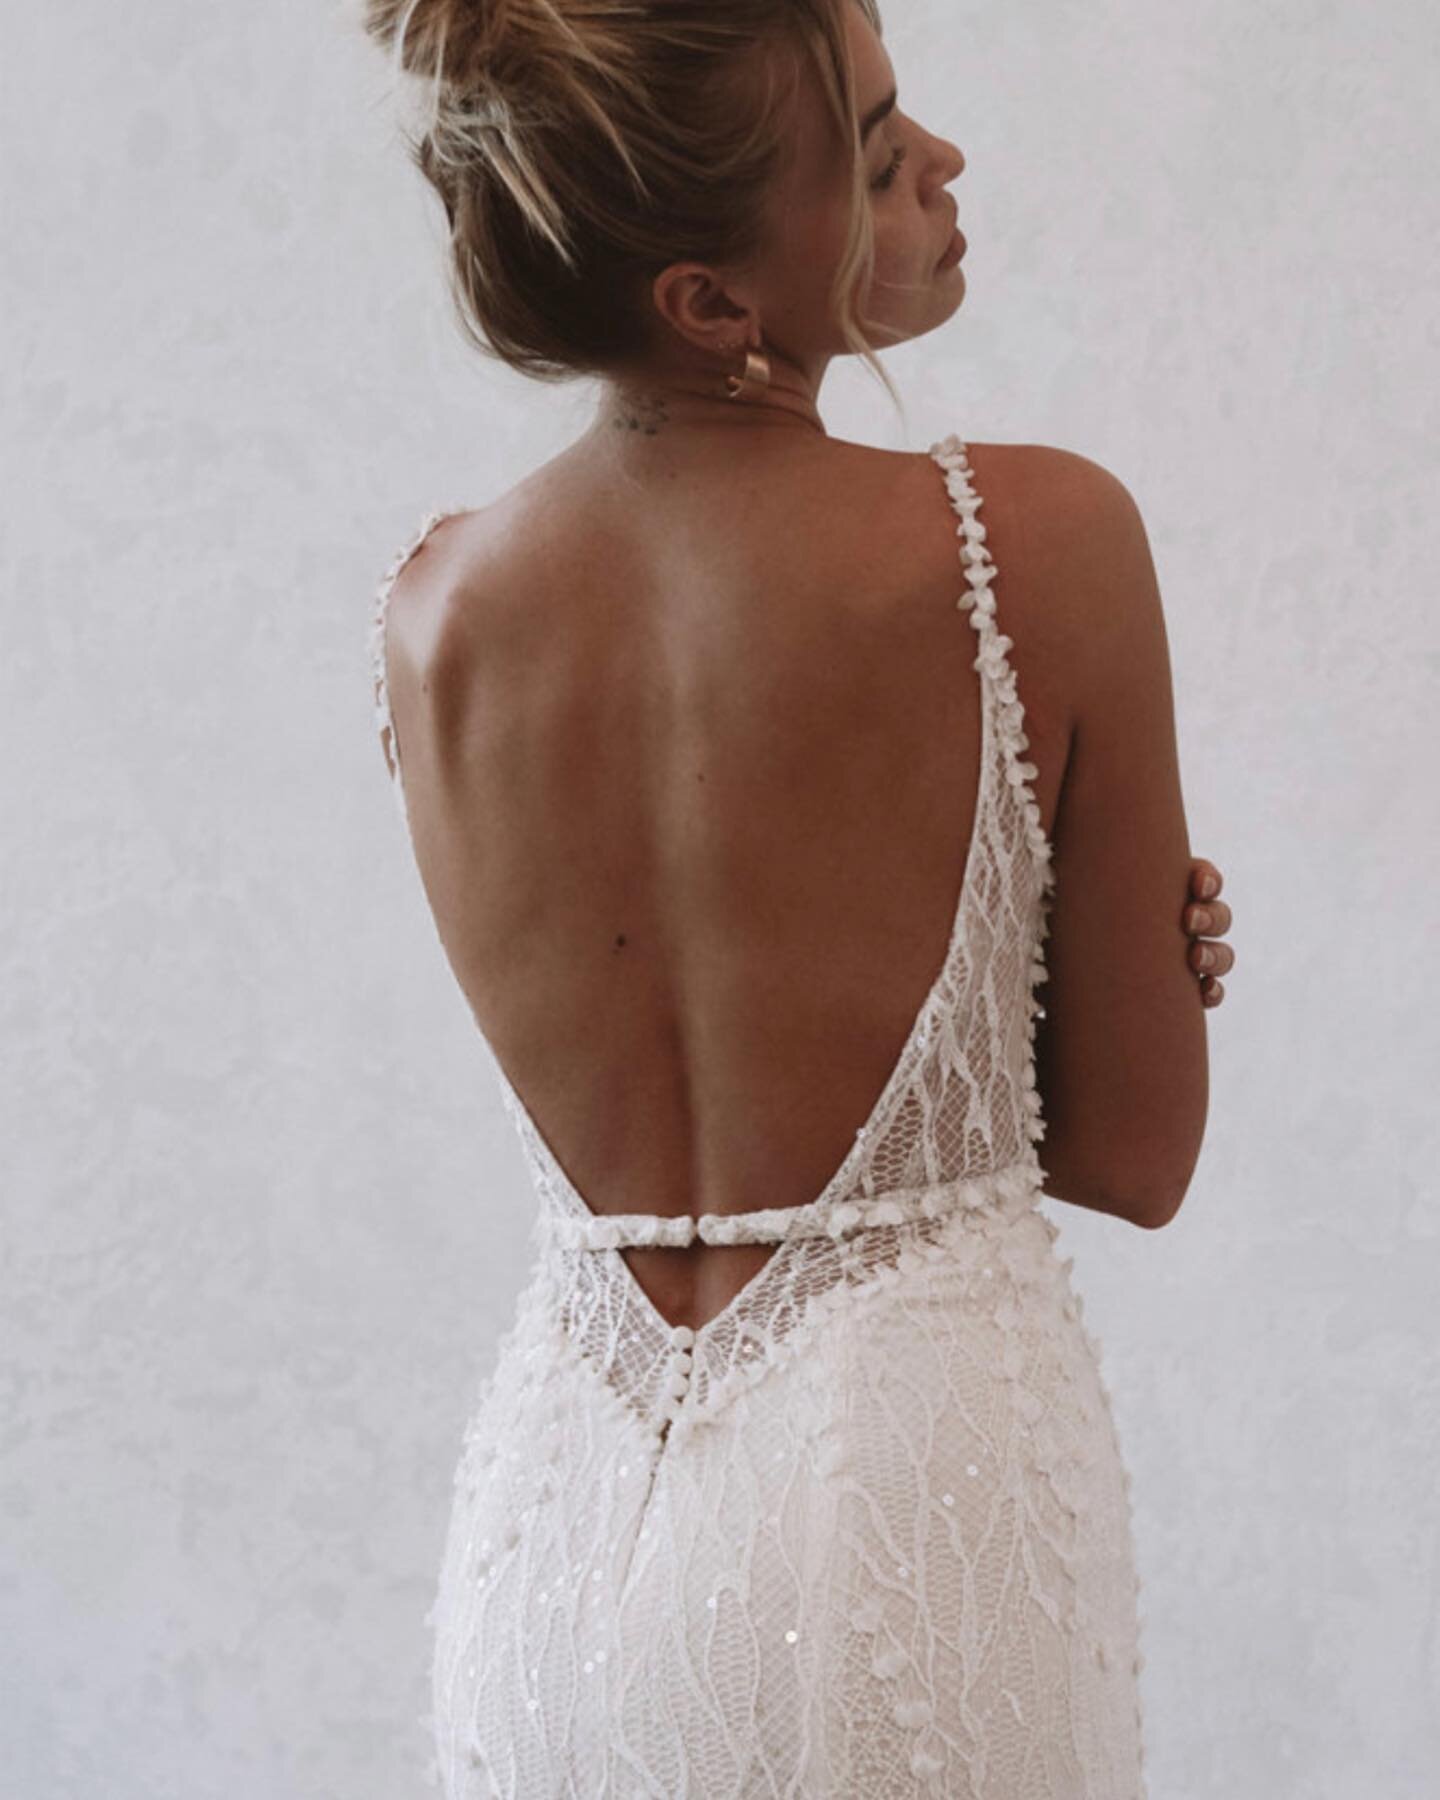 H A R L O W &hellip;

&hellip;the low back wedding dress of dreams 💭

Sparkling lace, 3D textured petal detail and a stunning long train, she has it all 🤍

📸 by @sharnahupfeldphotography 

Harlow V2 by Made with Love Bridal available now @perlanov